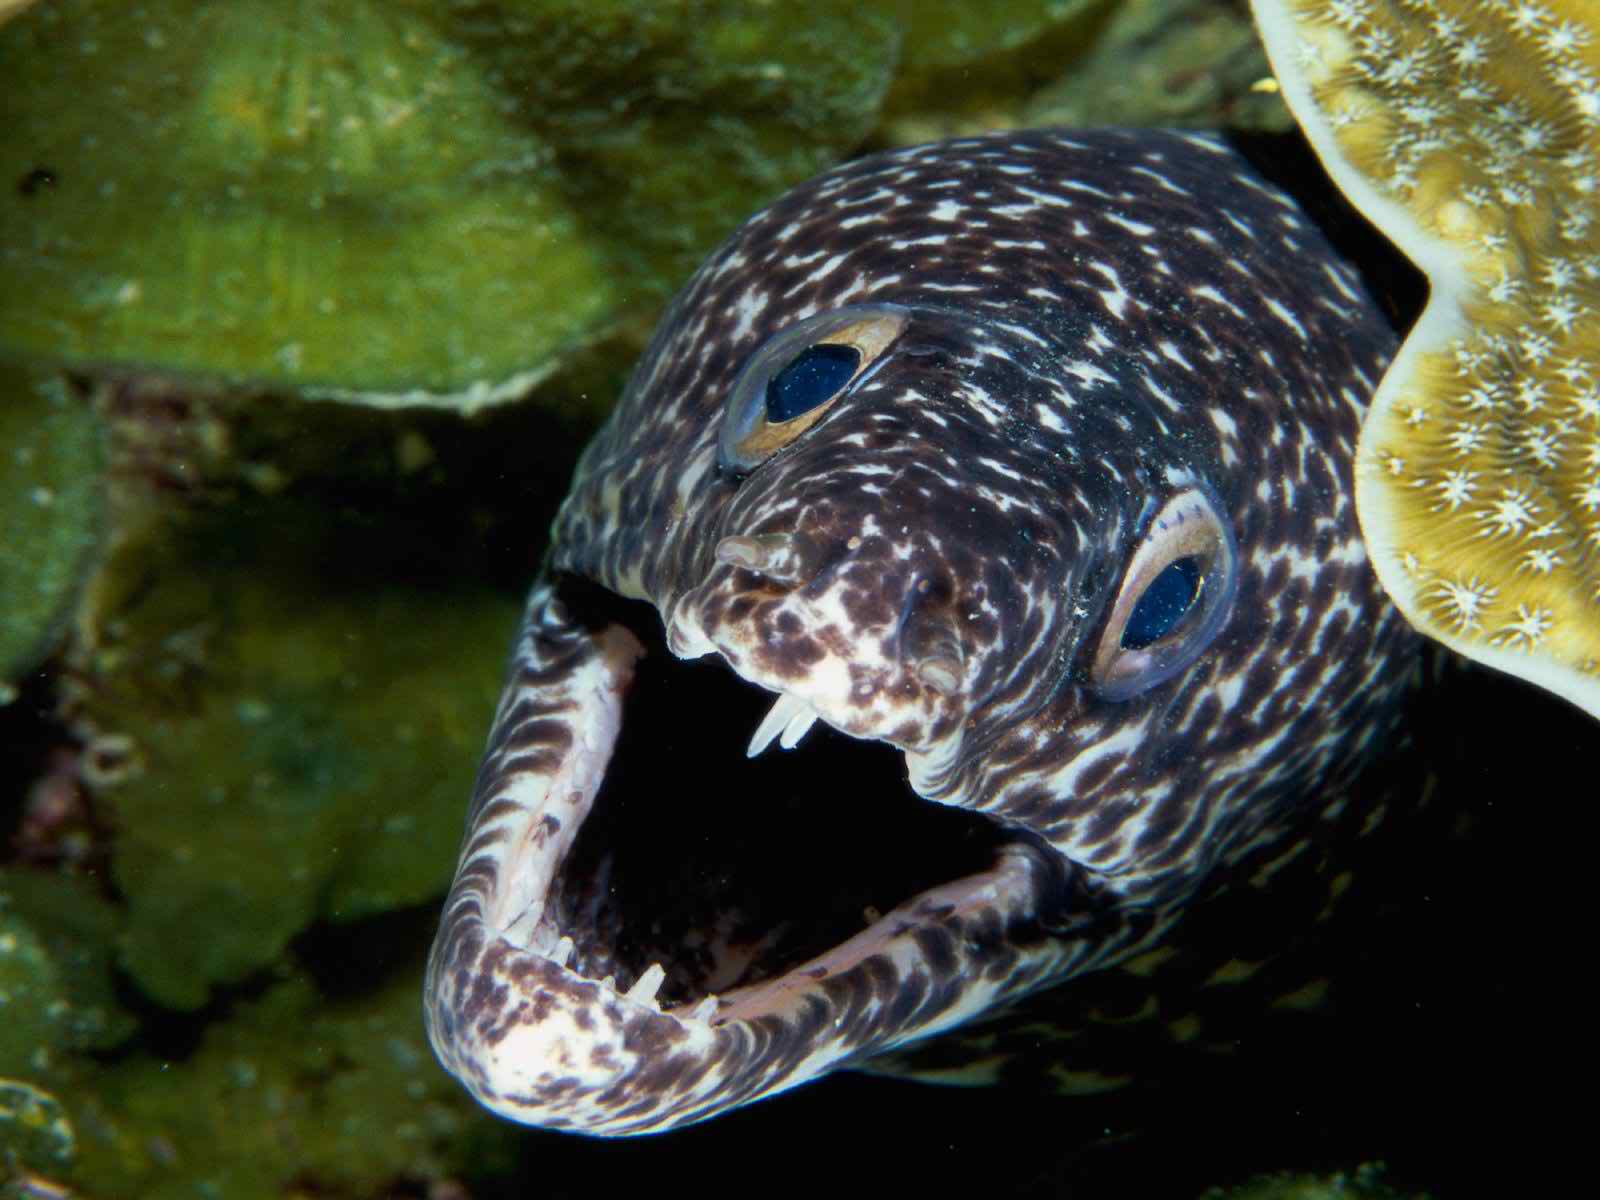 spotted moray eel image